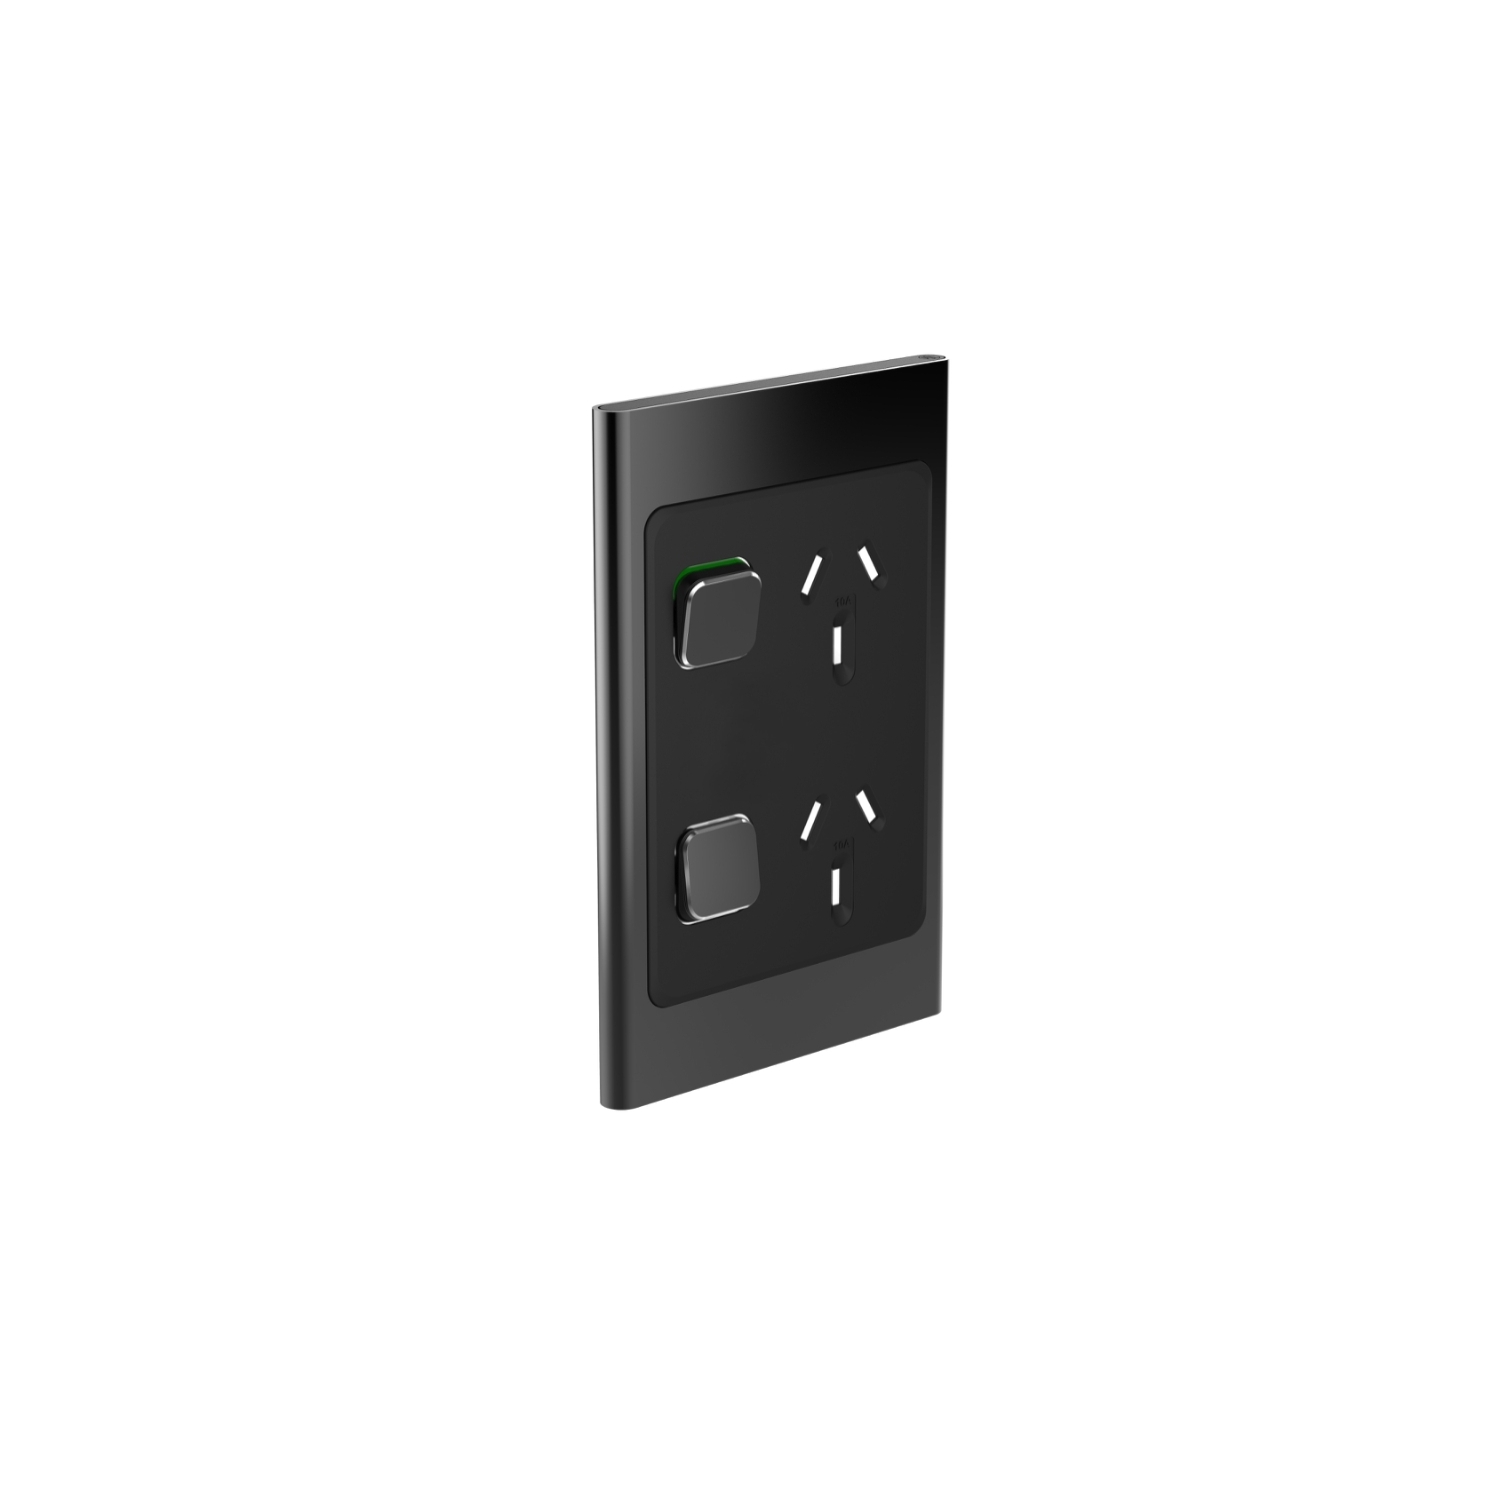 PDL Iconic Styl, cover frame, 2 switches & 2 sockets, vertical - Silver Shadow